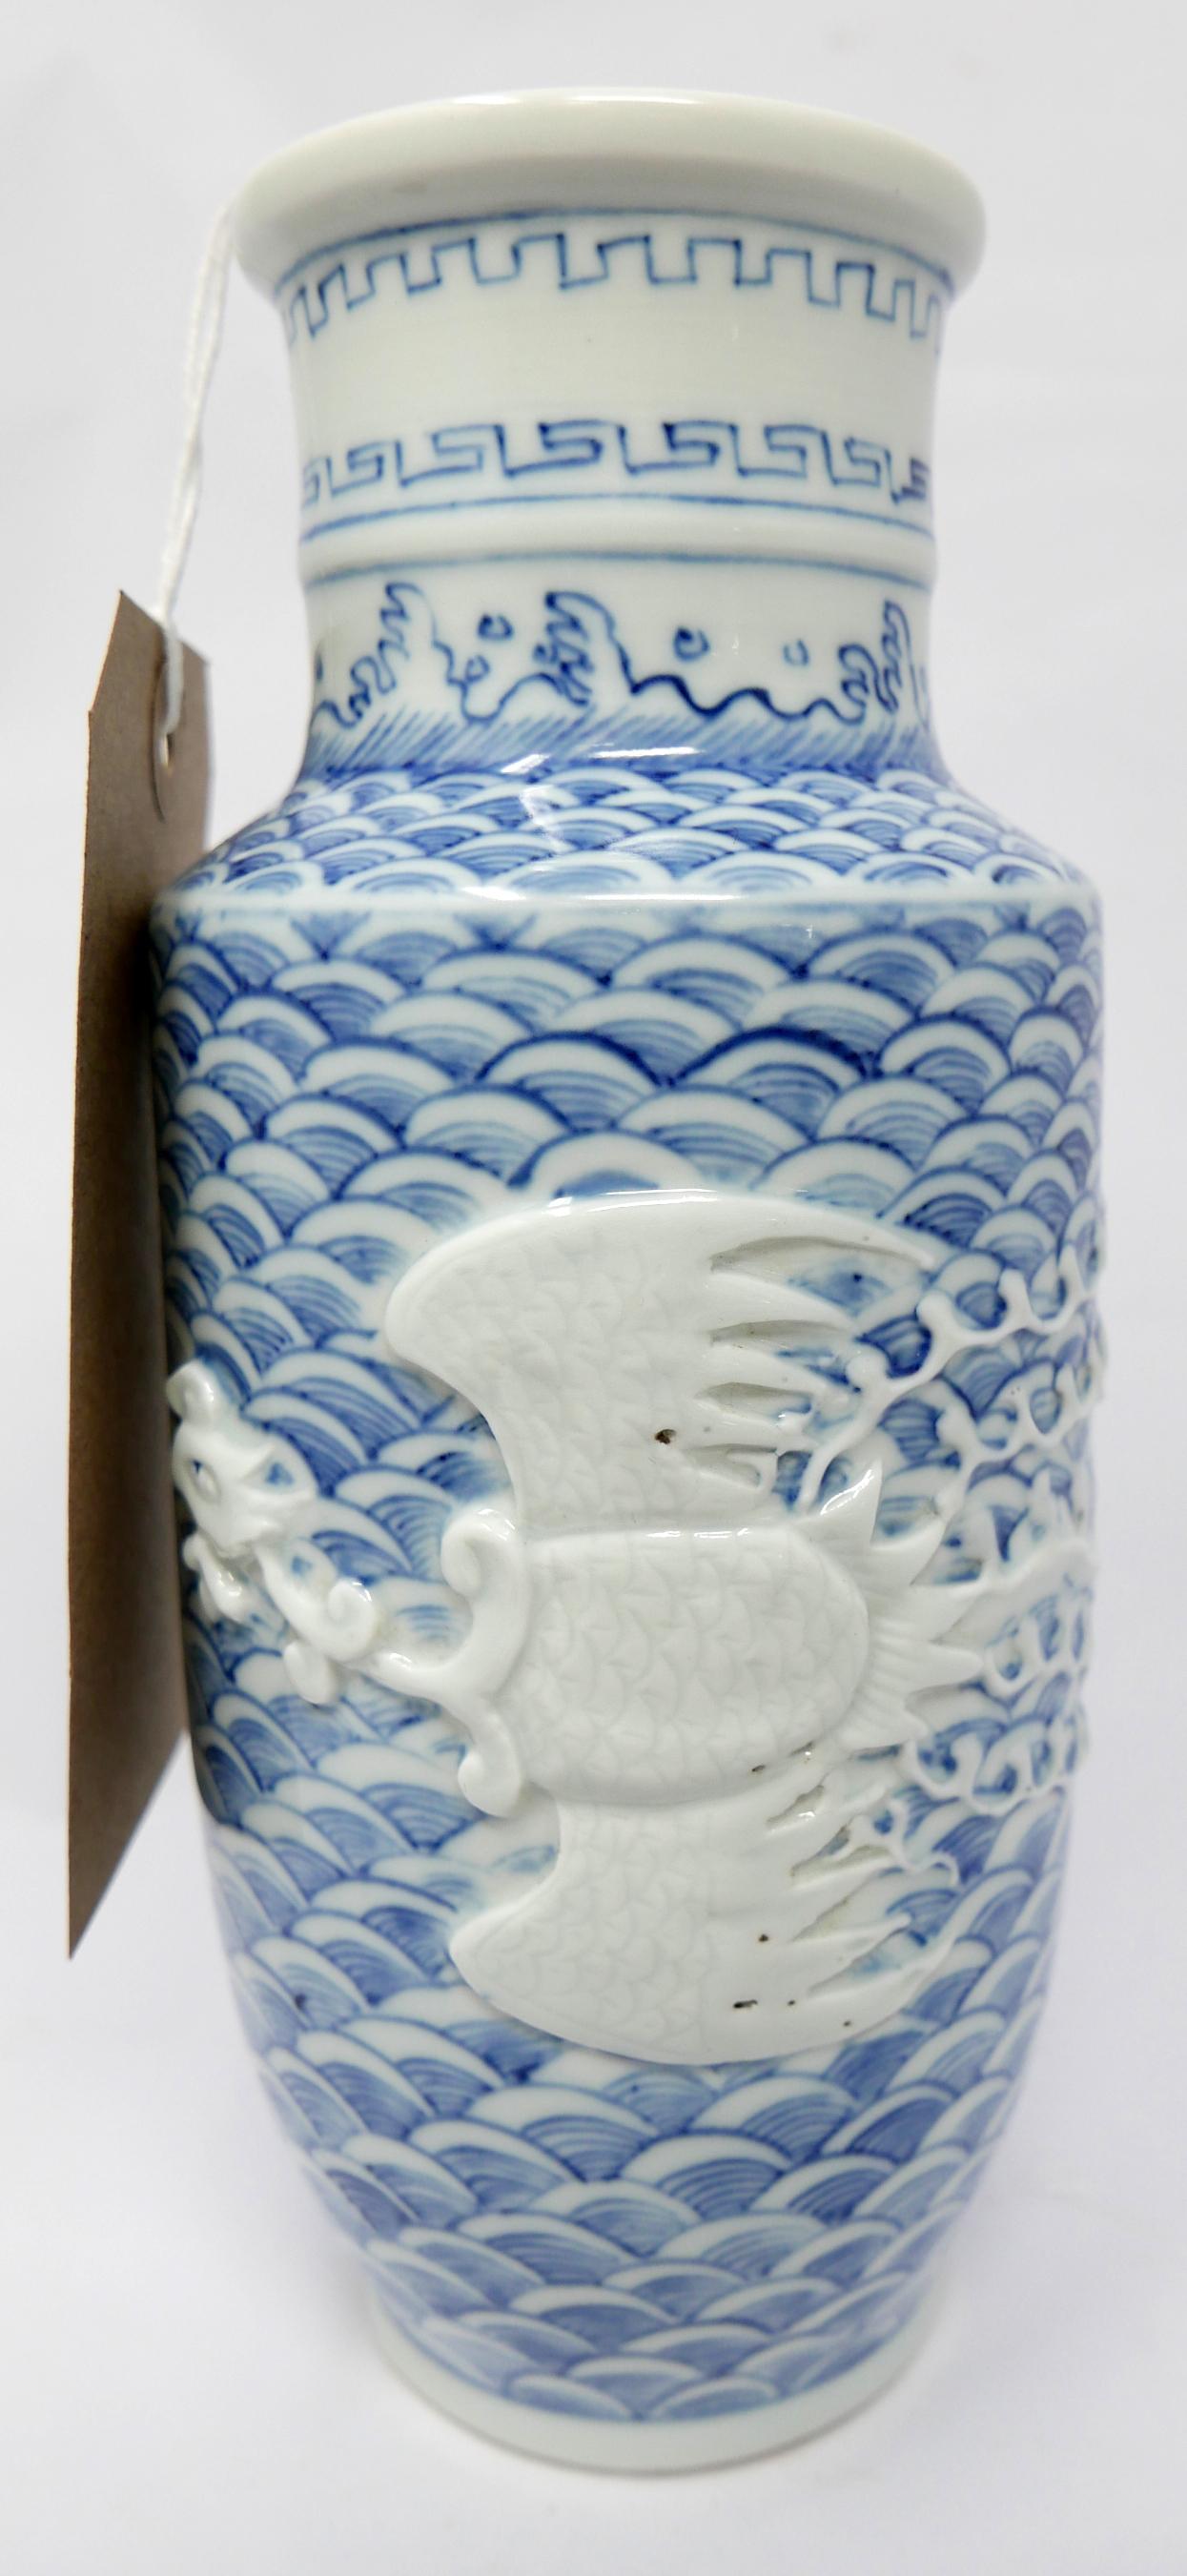 An early 20th century, Chinese, porcelain vase handpainted with a blue scaled ground adorned with an